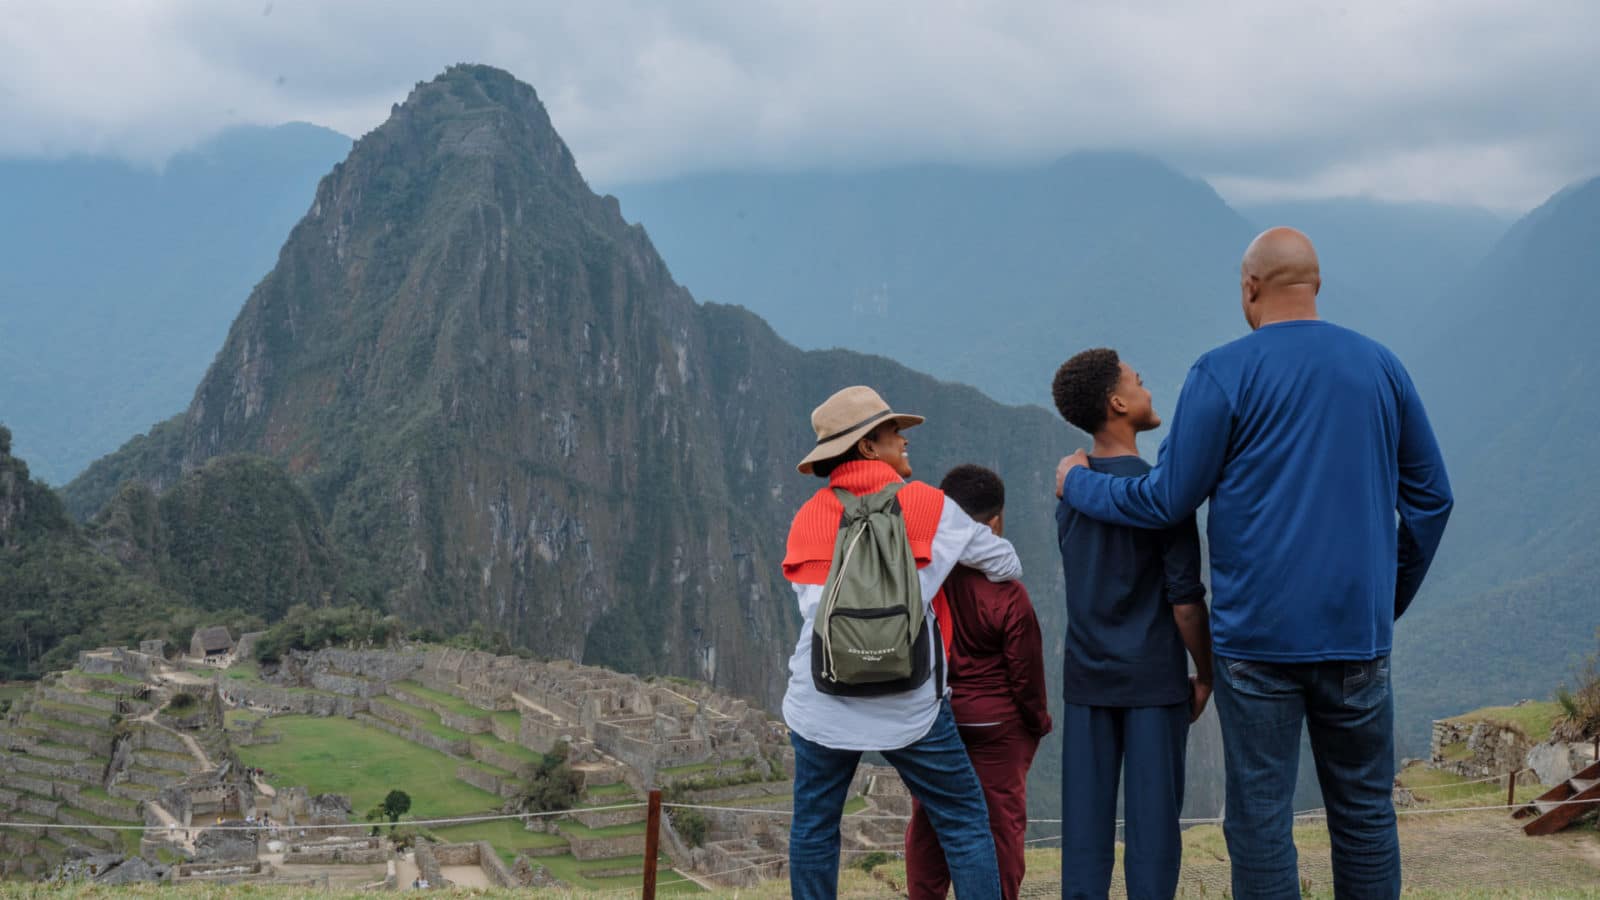 family at Machu Picchu on an Adventures by Disney tour looking out at the ruins